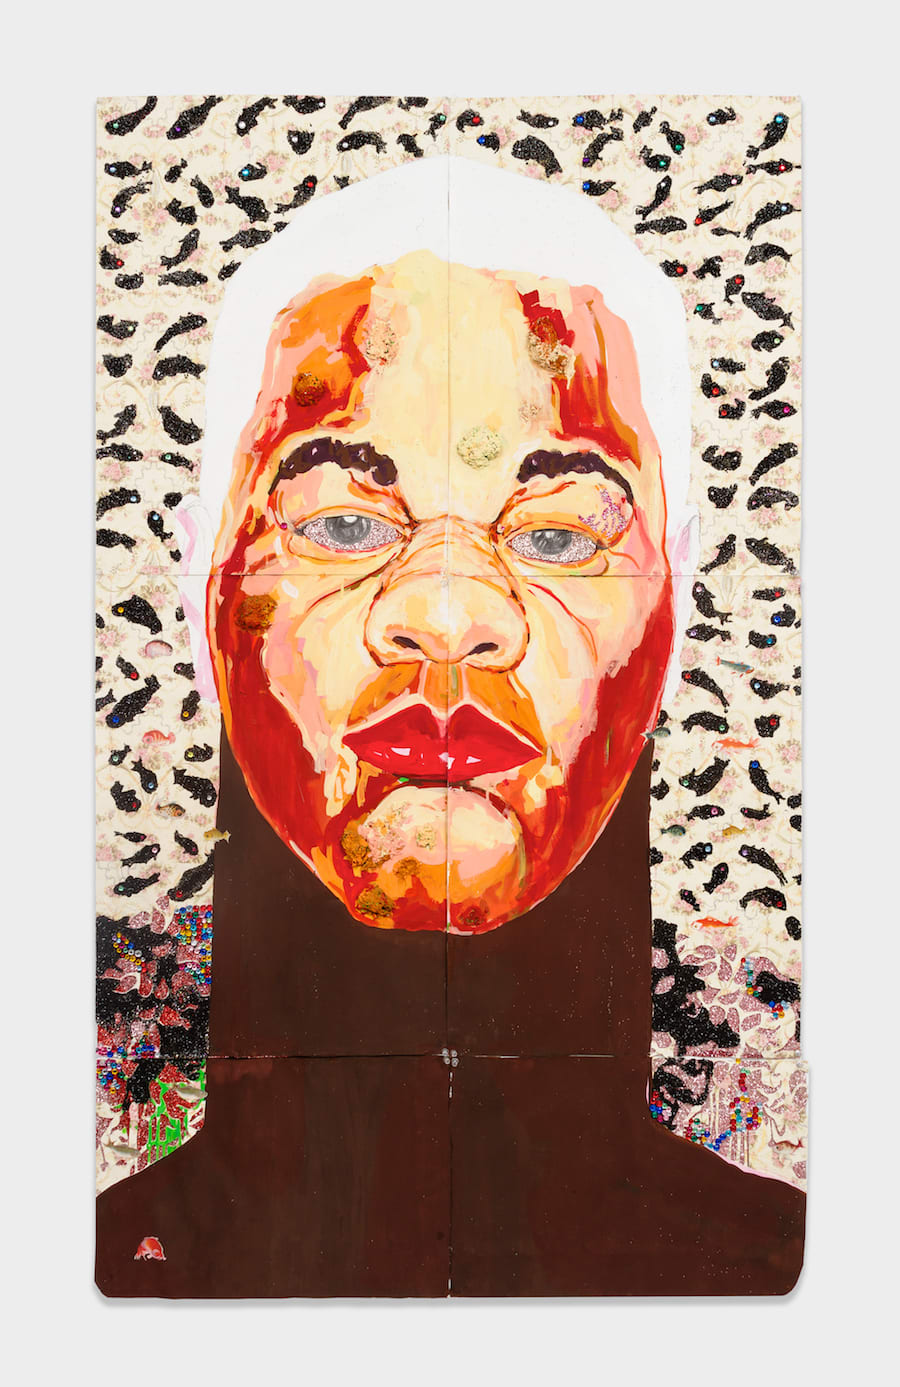 Ebony G. Patterson, Untitled (Blingas II) from Gangstas for Life, 2008